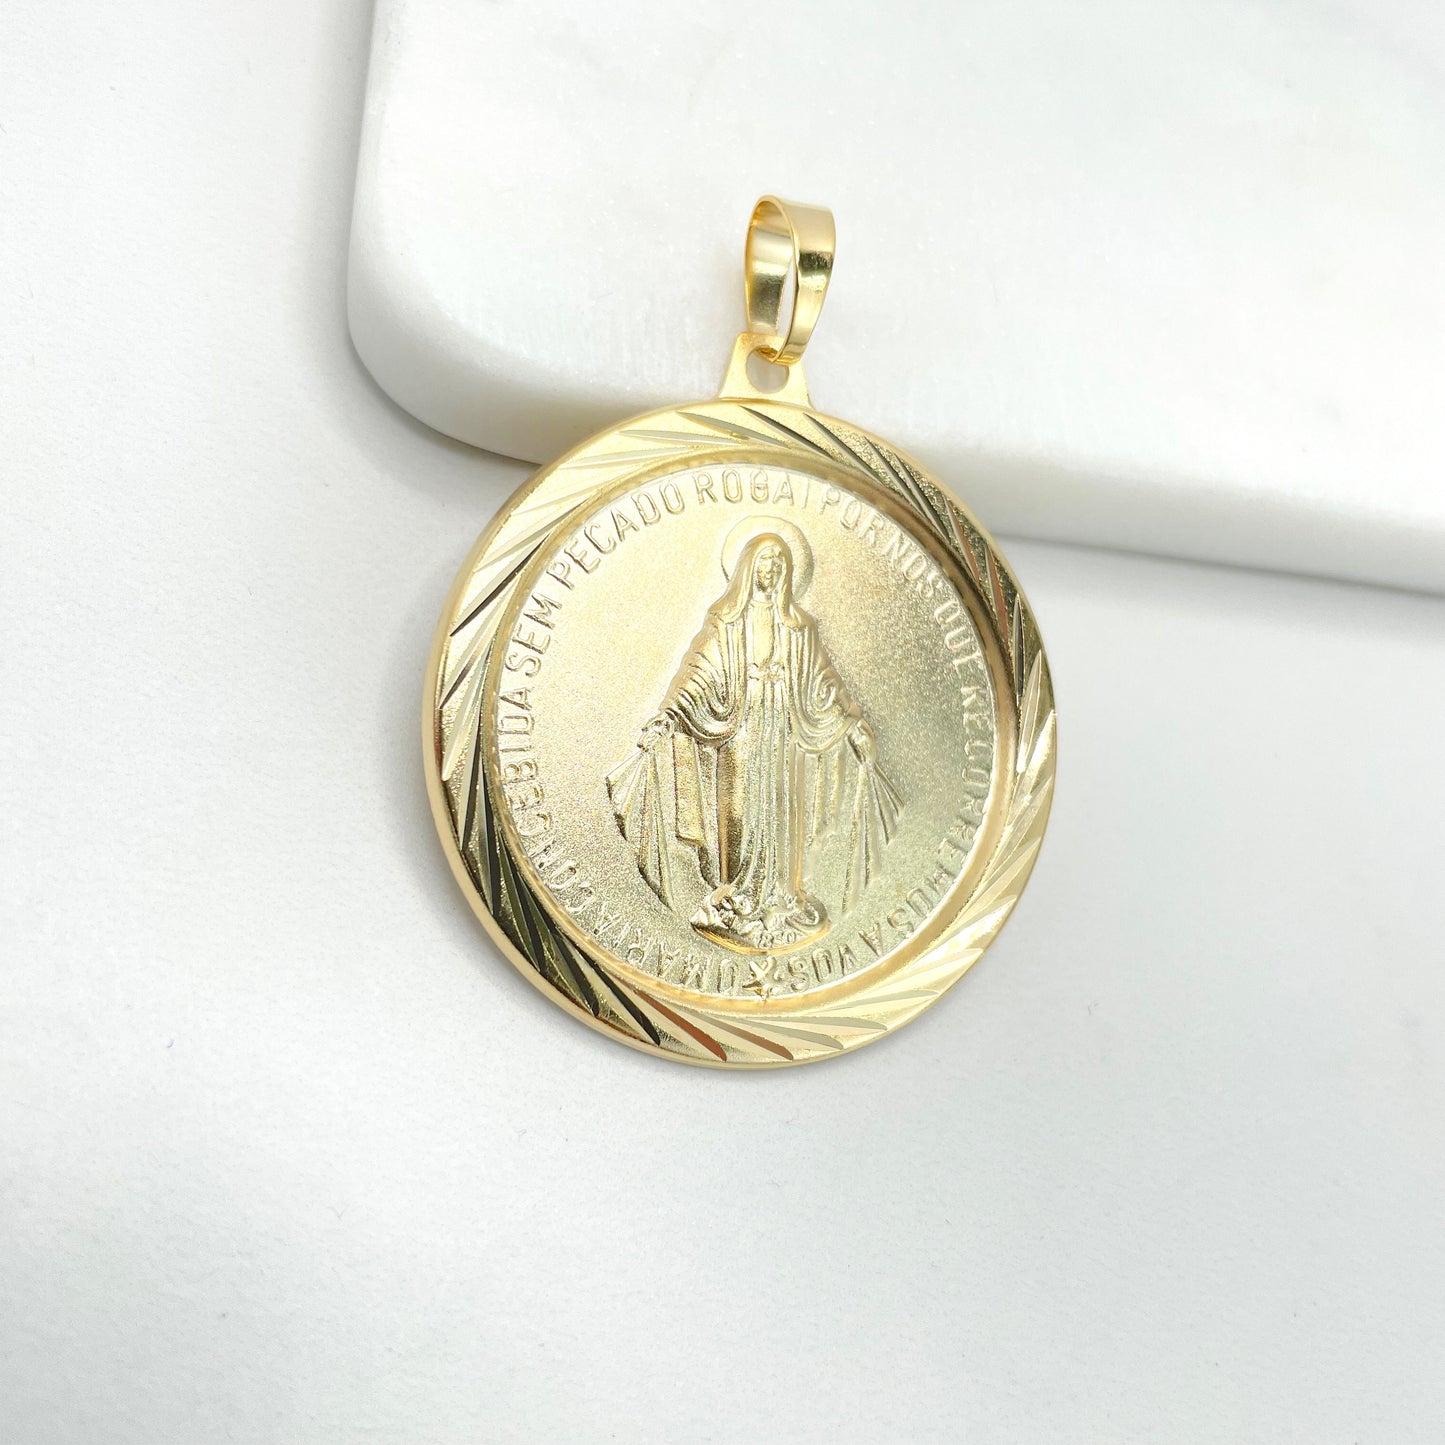 18k Gold Filled La Milagrosa, Miraculous Virgin with a Maria's Prayer, Fosco Round Medal Pendant Charms, Wholesale Jewelry Making Supplies